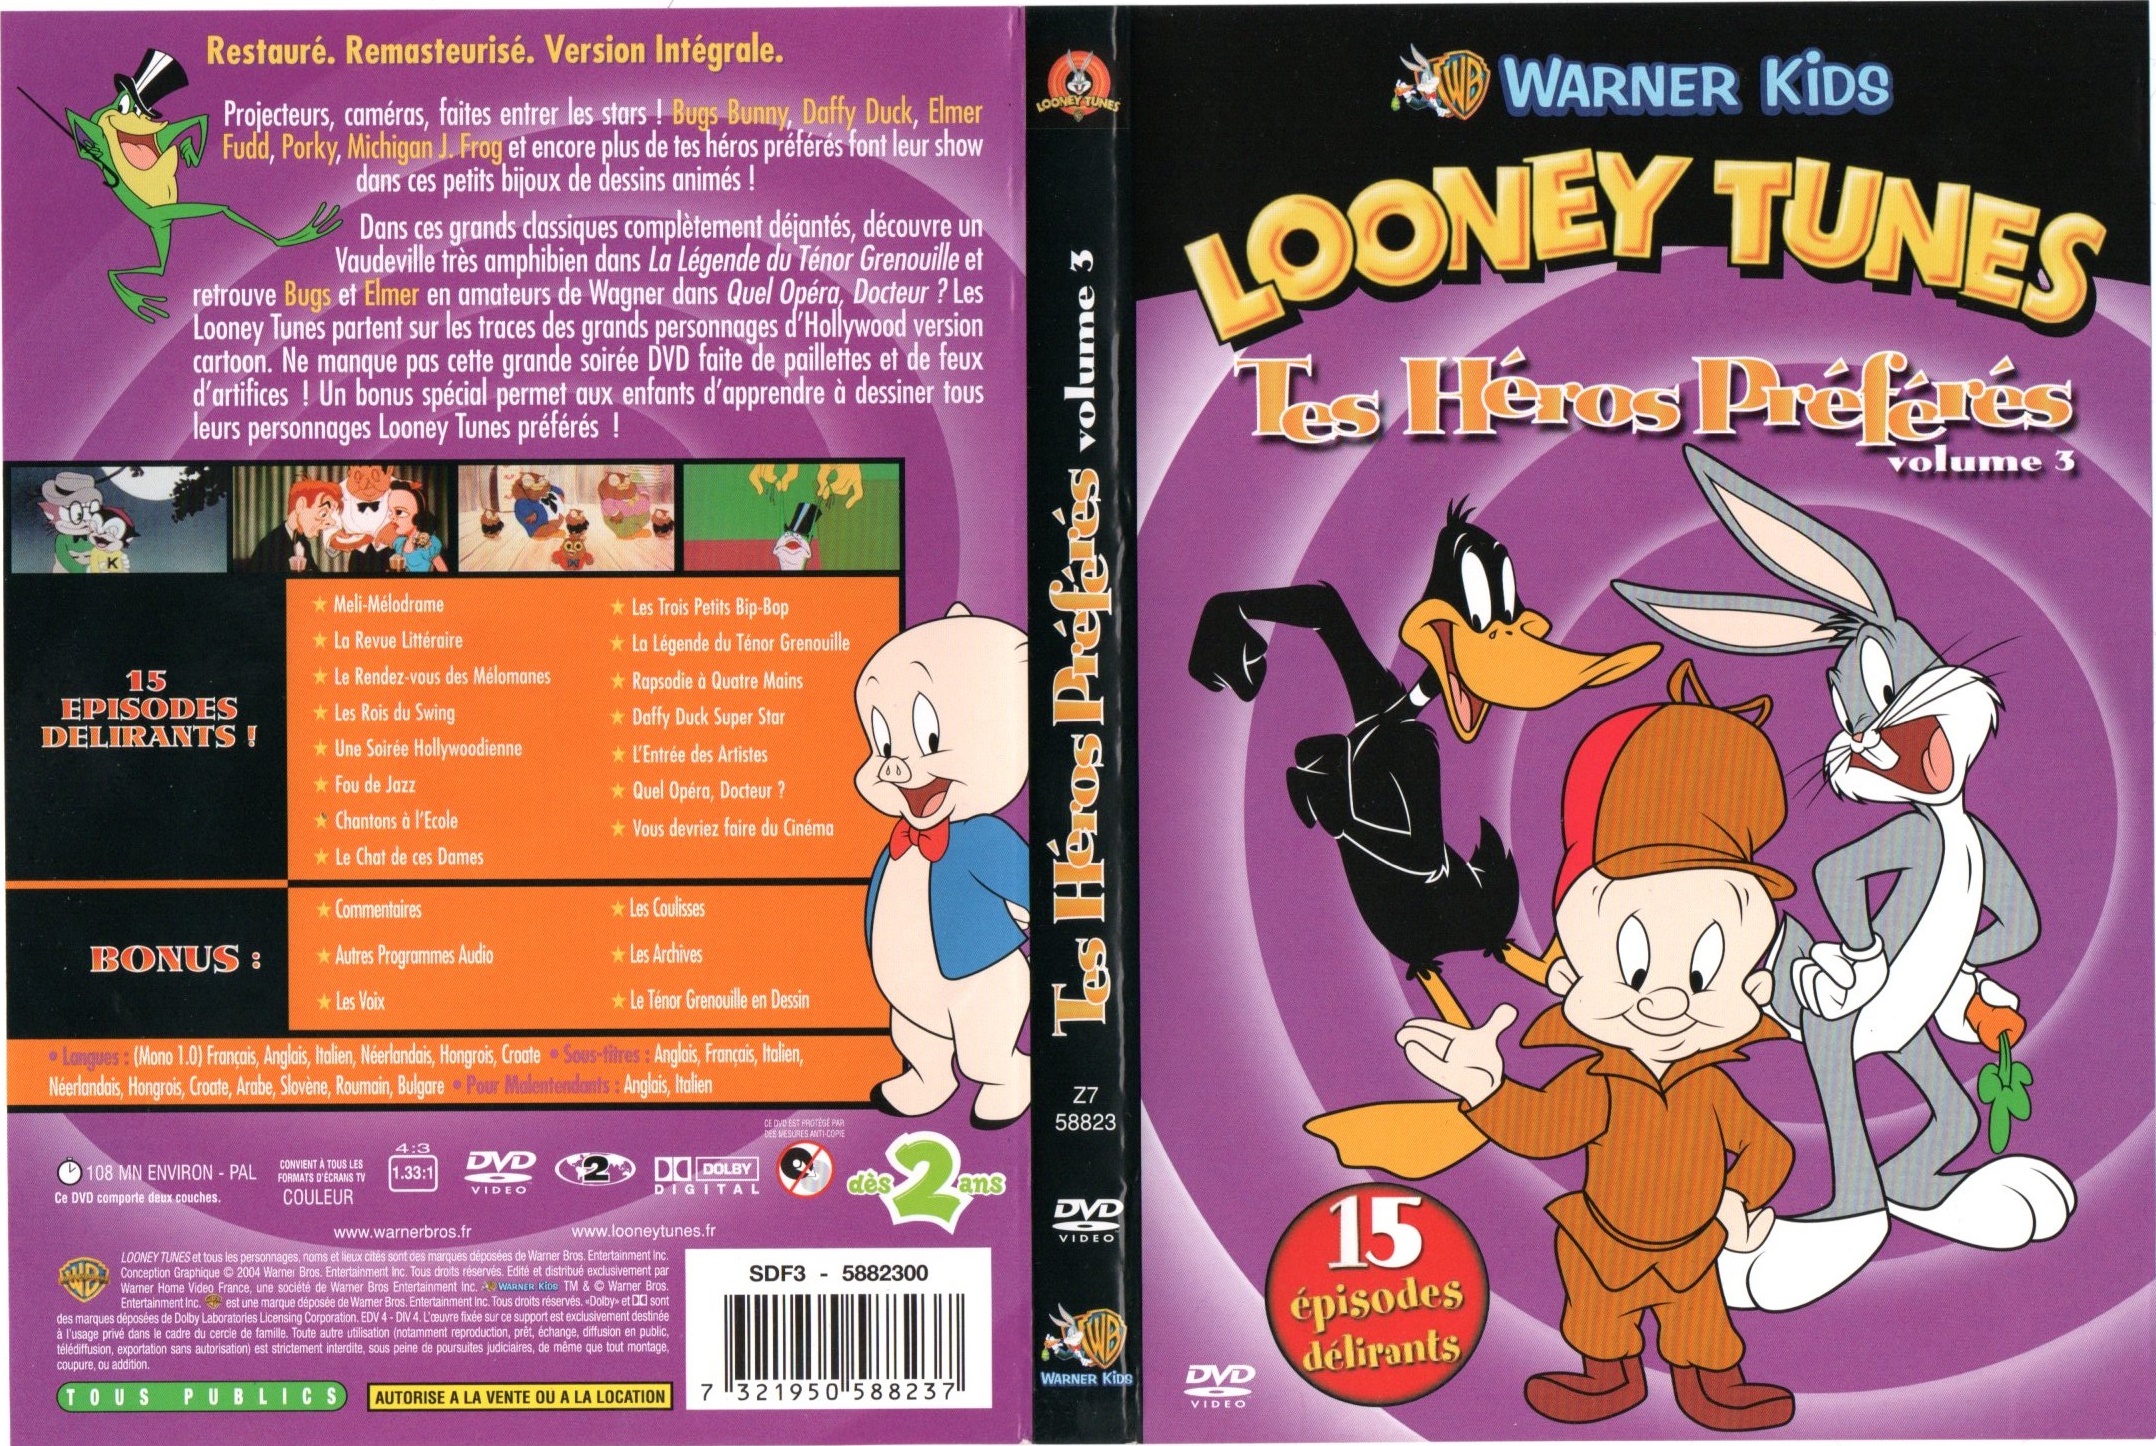 Jaquette DVD Looney Tunes Collection Tes heros preferes Volume 3